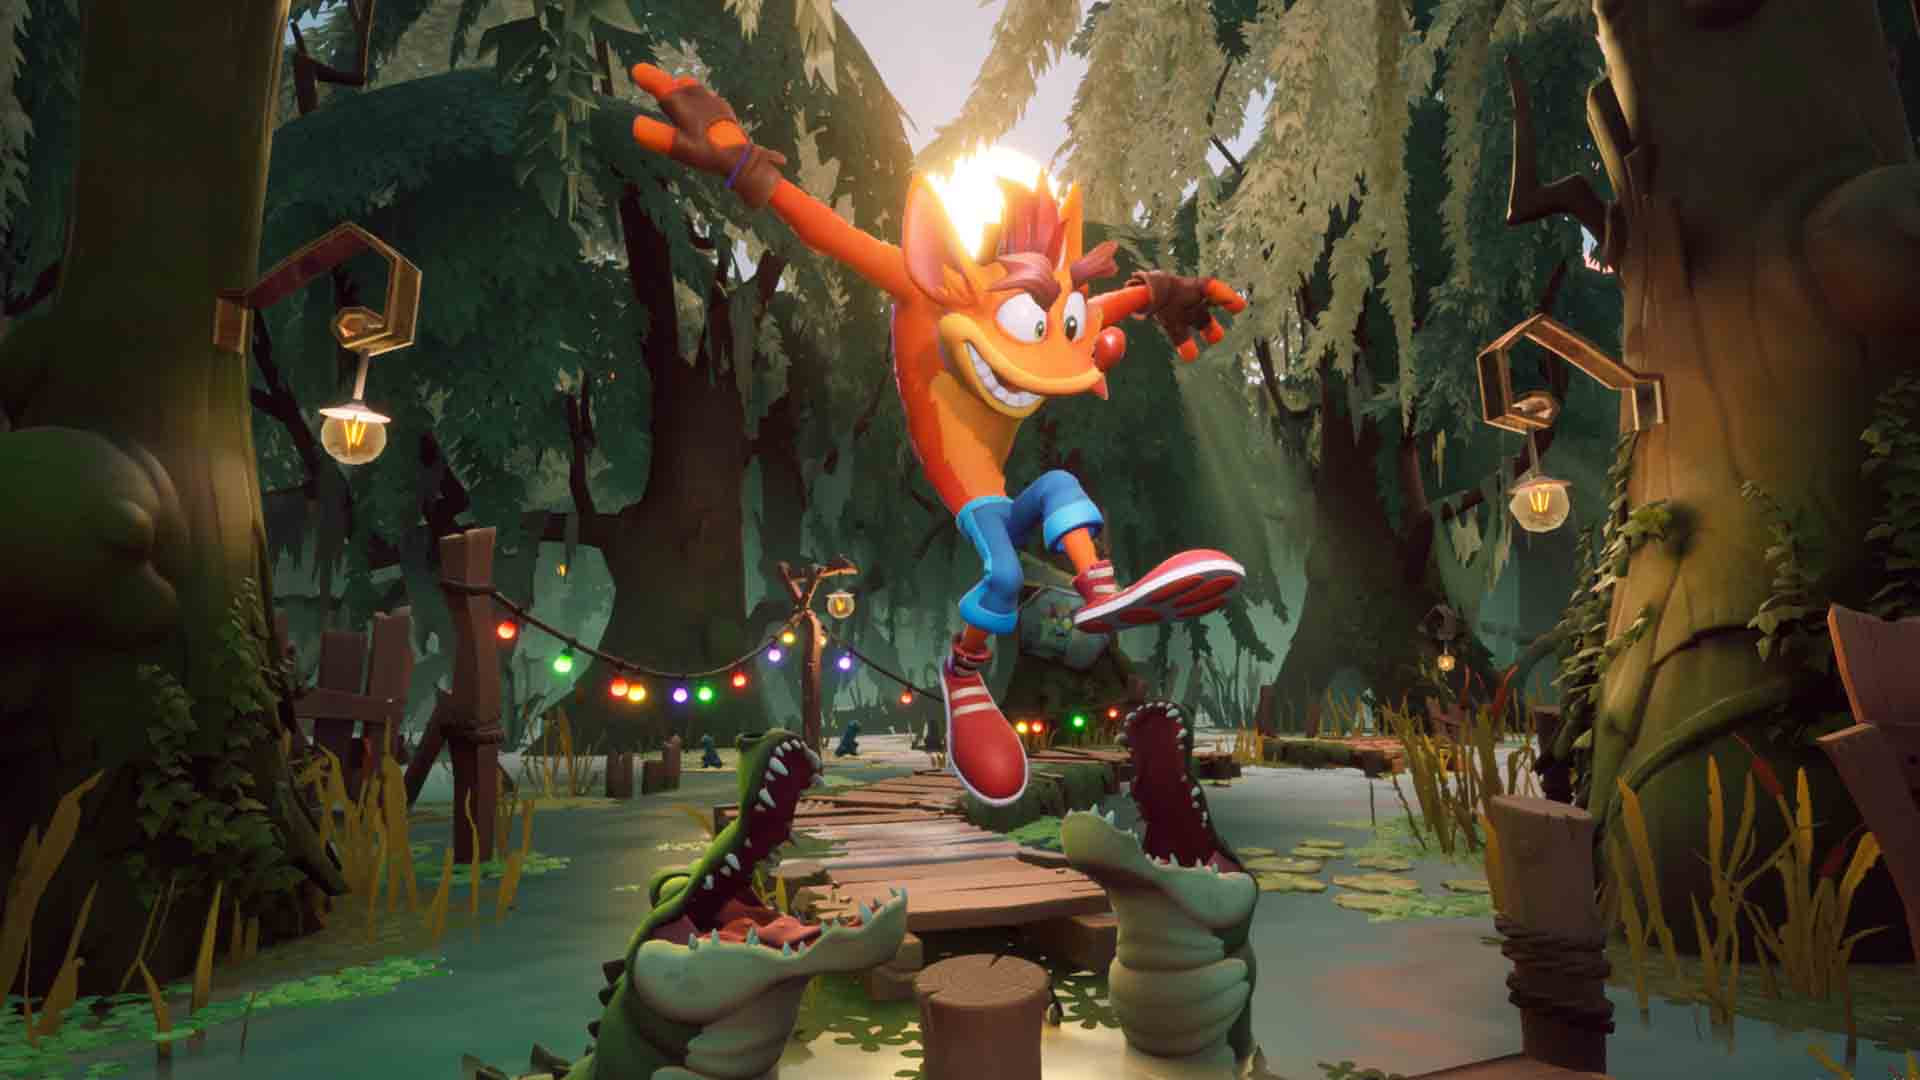 A new Crash Bandicoot game is rumoured to be announced at The Game Awards